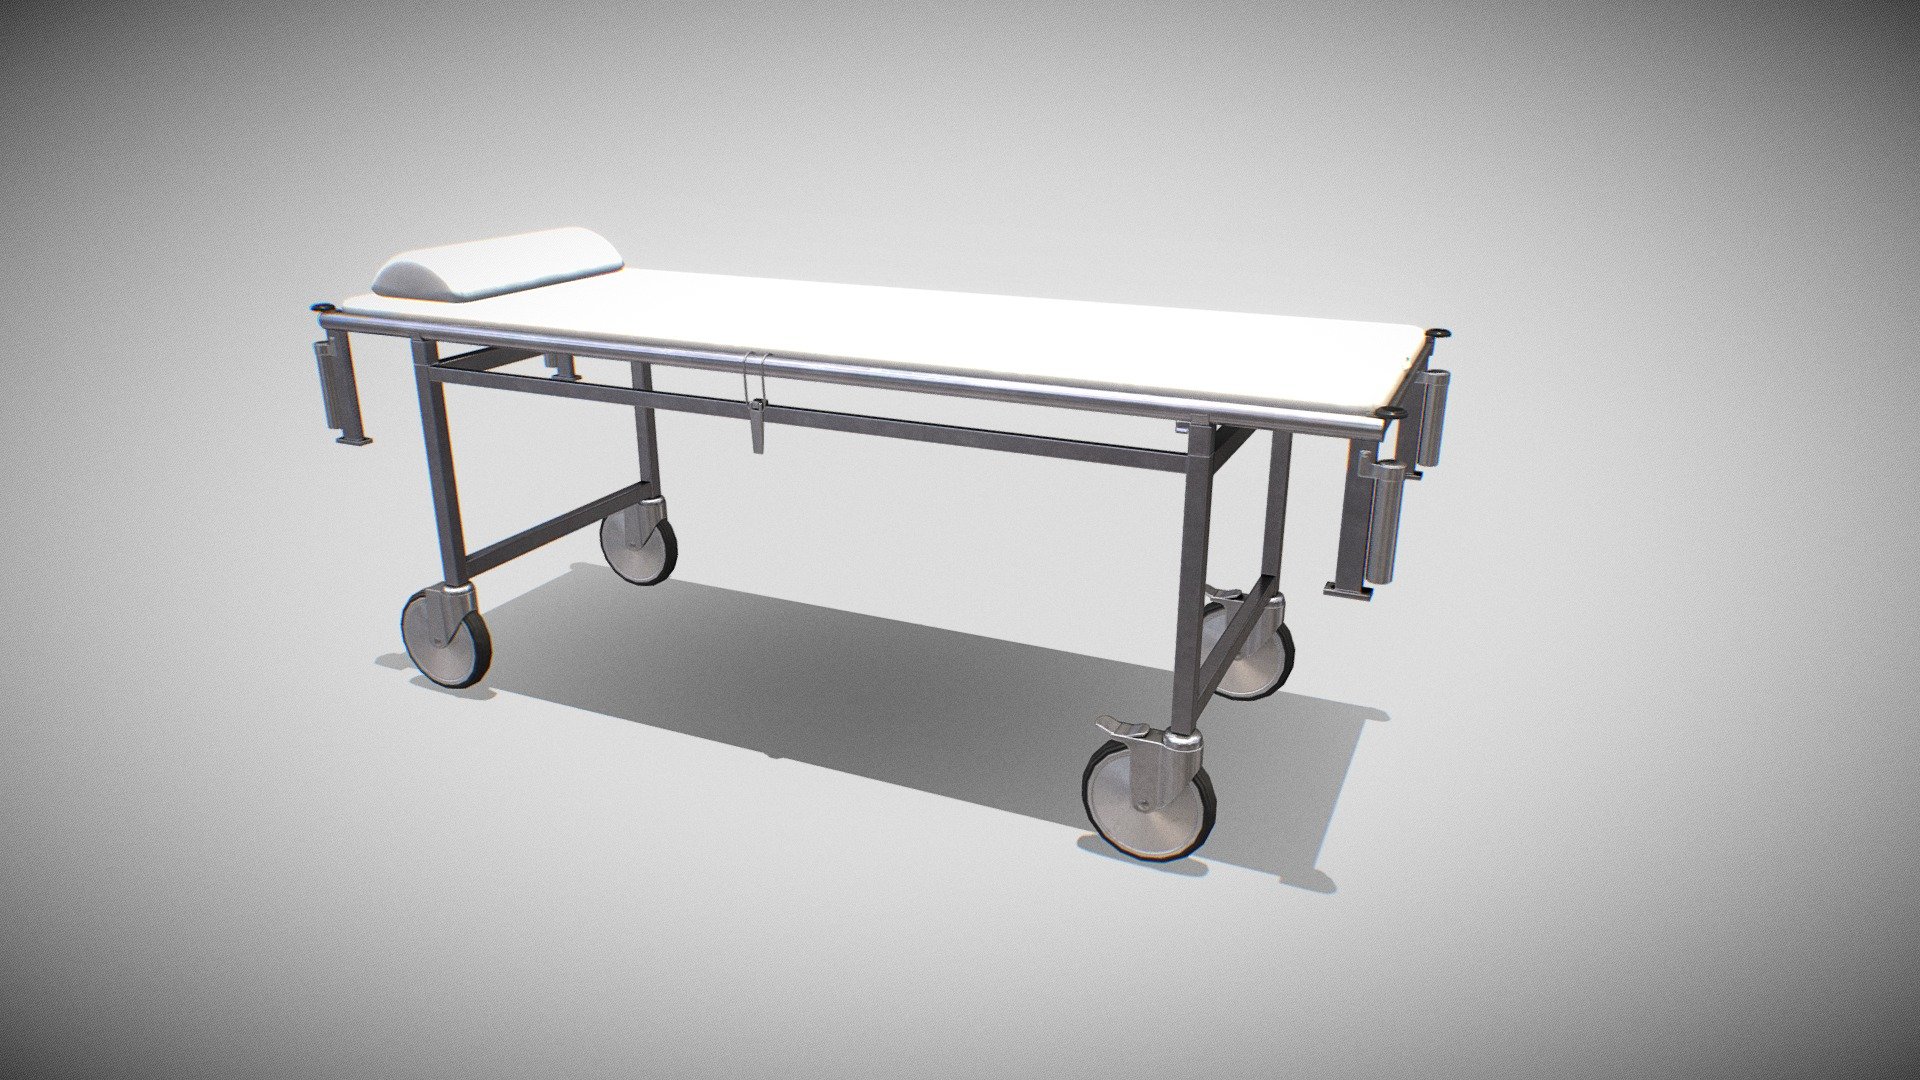 Low-poly PBR _Medical trolley_model intended for game/realtime/background use.
Model was not intended for subdivision. 



Createn in Maya18 and textured SP2 



Modeled in real-world scale - Meters



No special plug-ins necessary to use this product 



Quad/Tris only polygon - 3942 count 



Model is included in 4 file formats 
Include only geometry with uvs, and texture need add manually. 
                -Maya 2018
                -FBX 
                -OBJ 
                -GLB 2k and 4k 



High quality 4096x4096 resolution textures in PNG:

PBR Maps:
-BaseColor, 
-AO, 
-Roughness, 
-Metalness, 
-Normal, 
-Glossiness, 
-Specular. 

+Unity maps (+HDRP maps):
-Diffuse, 
-Normal map, 
-MetallicSmoothness.

+Unreal Engine 4 maps:
-BaseColor, 
-Normal, 
-OcclusionRoughnessMetallic 3d model